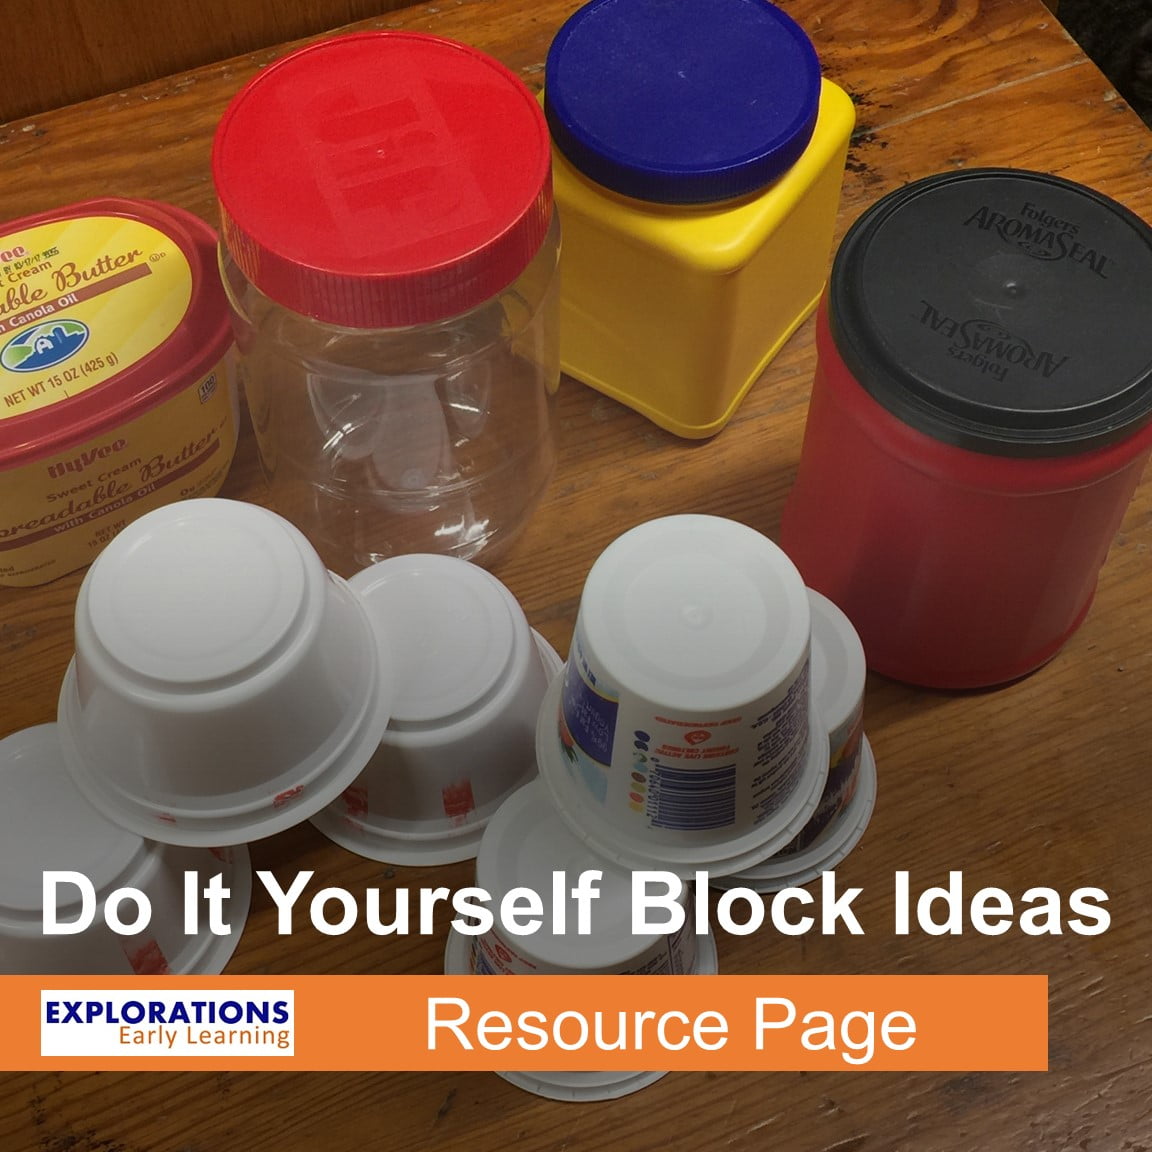 Do It Yourself Block Ideas | Resource Page